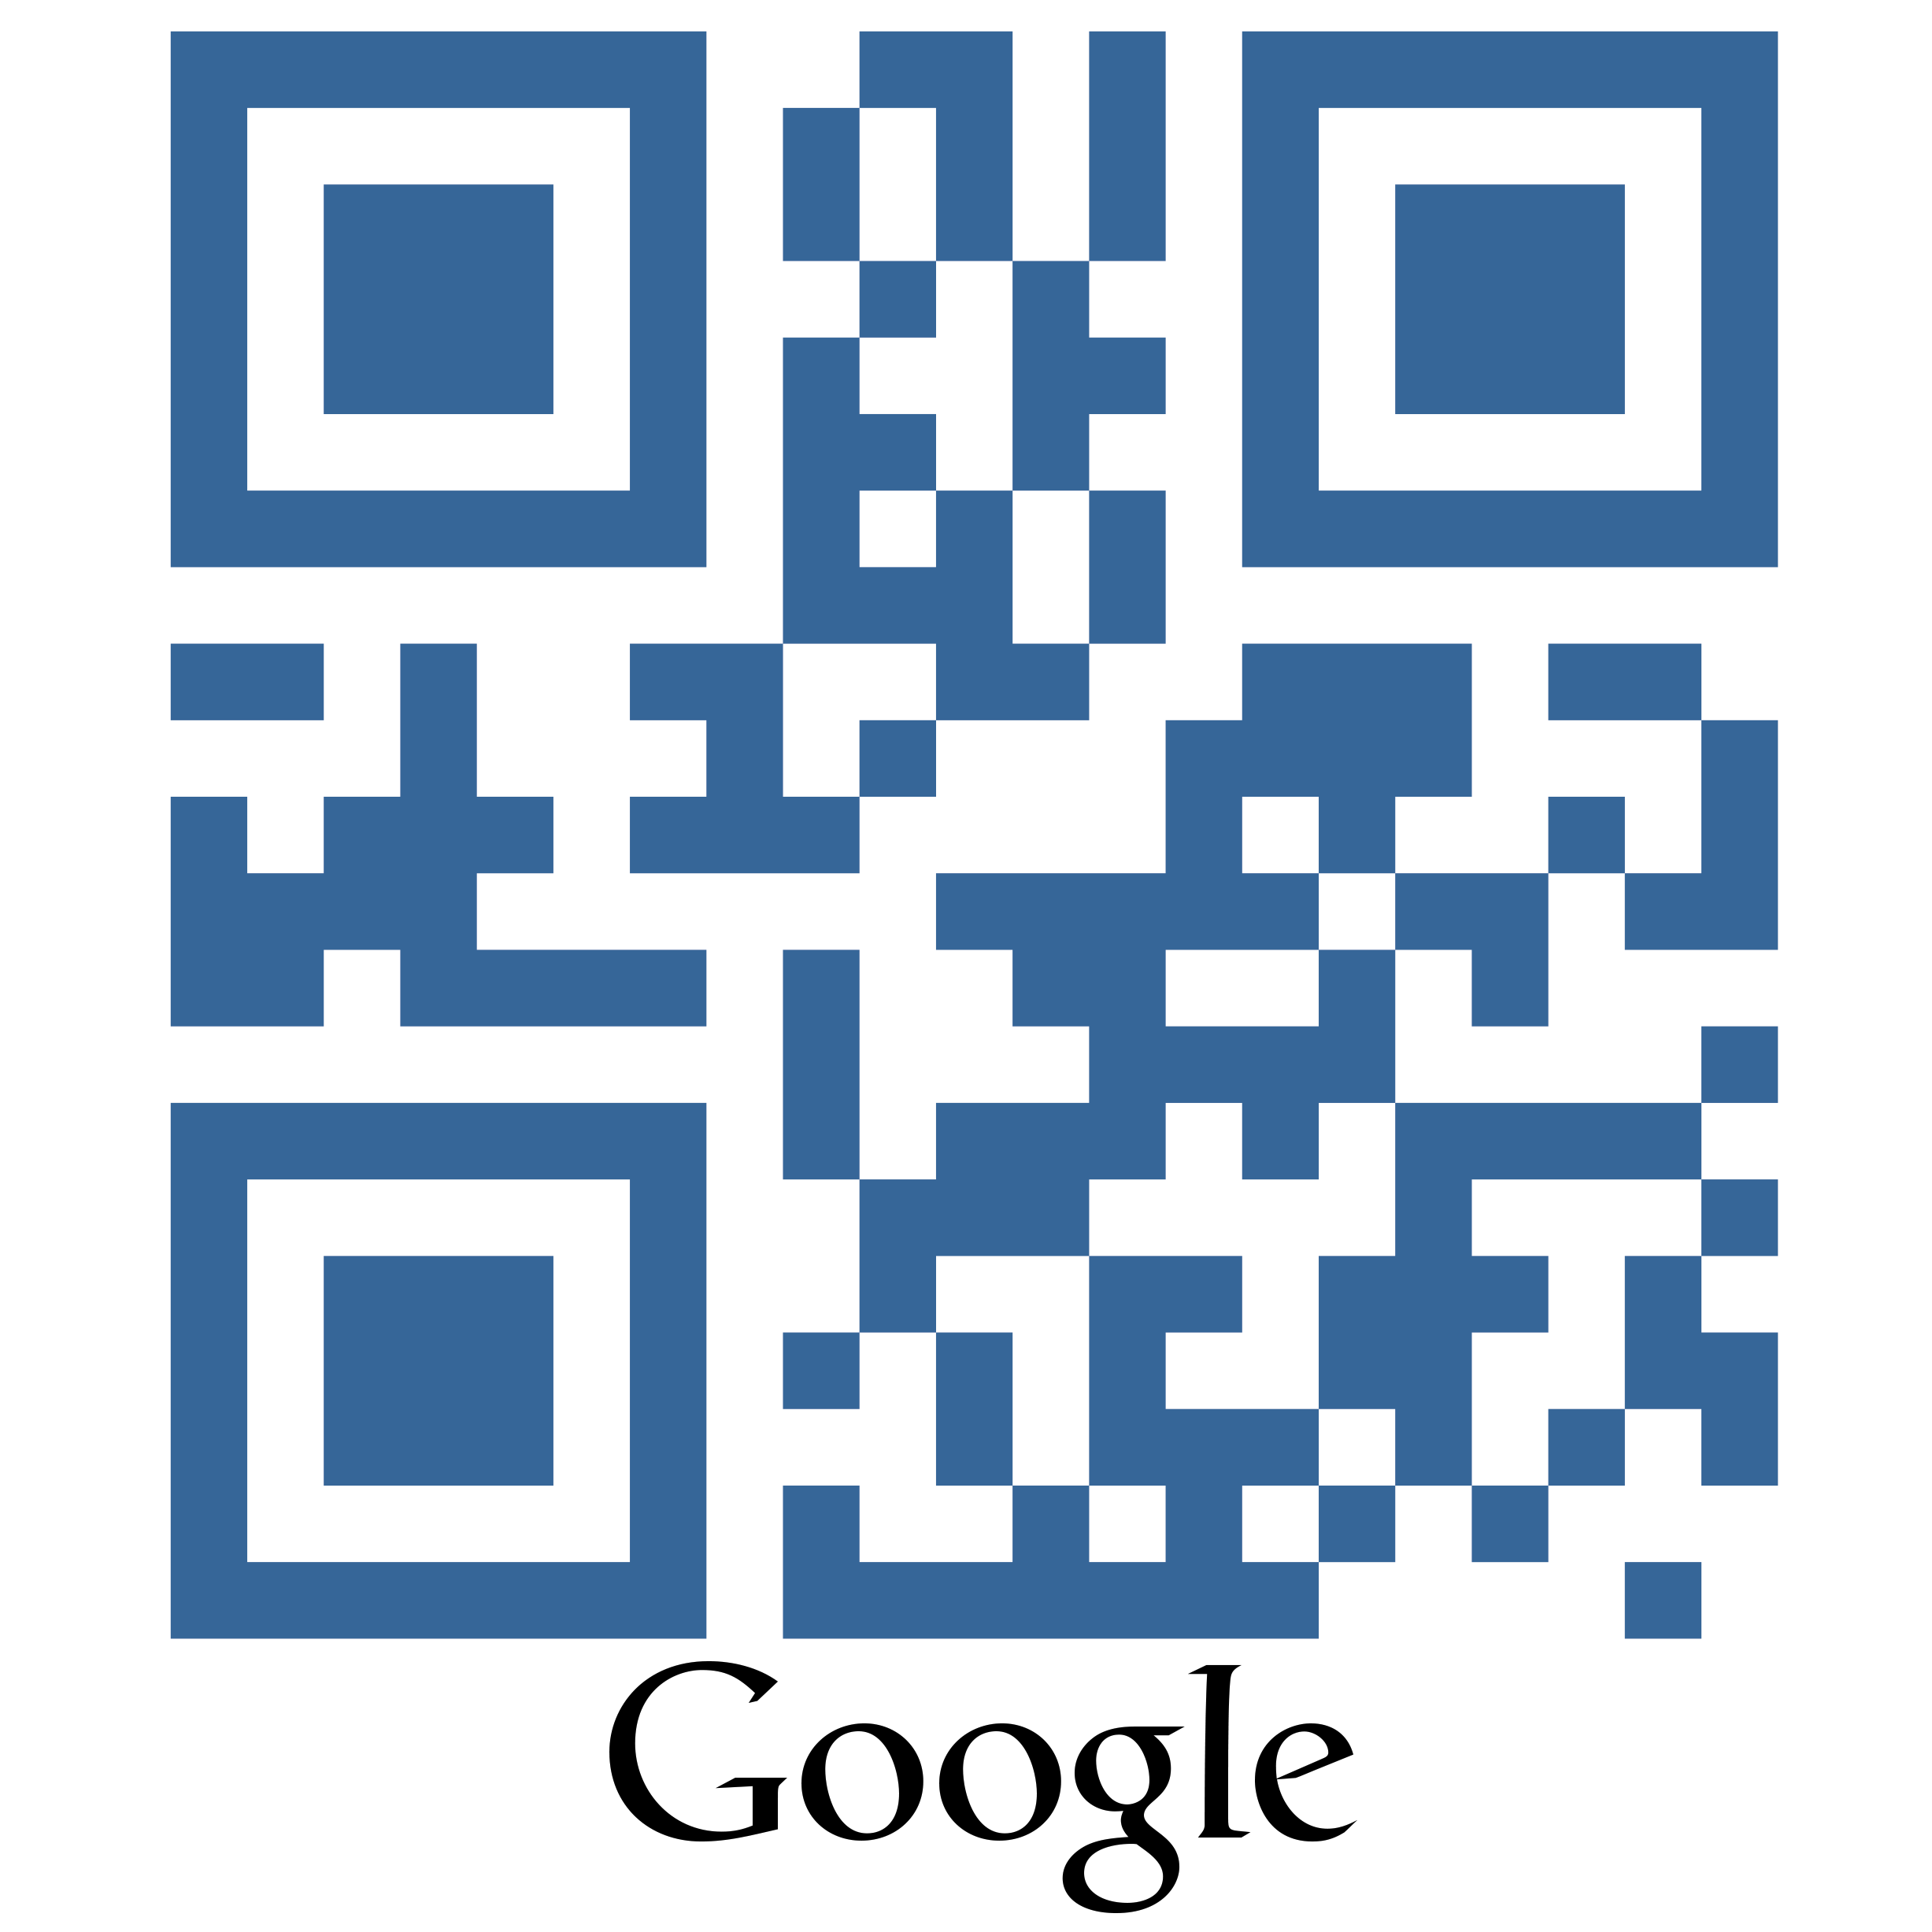 Vanity URL Google Maps QR Code for Central Expressway Optical on Google Maps